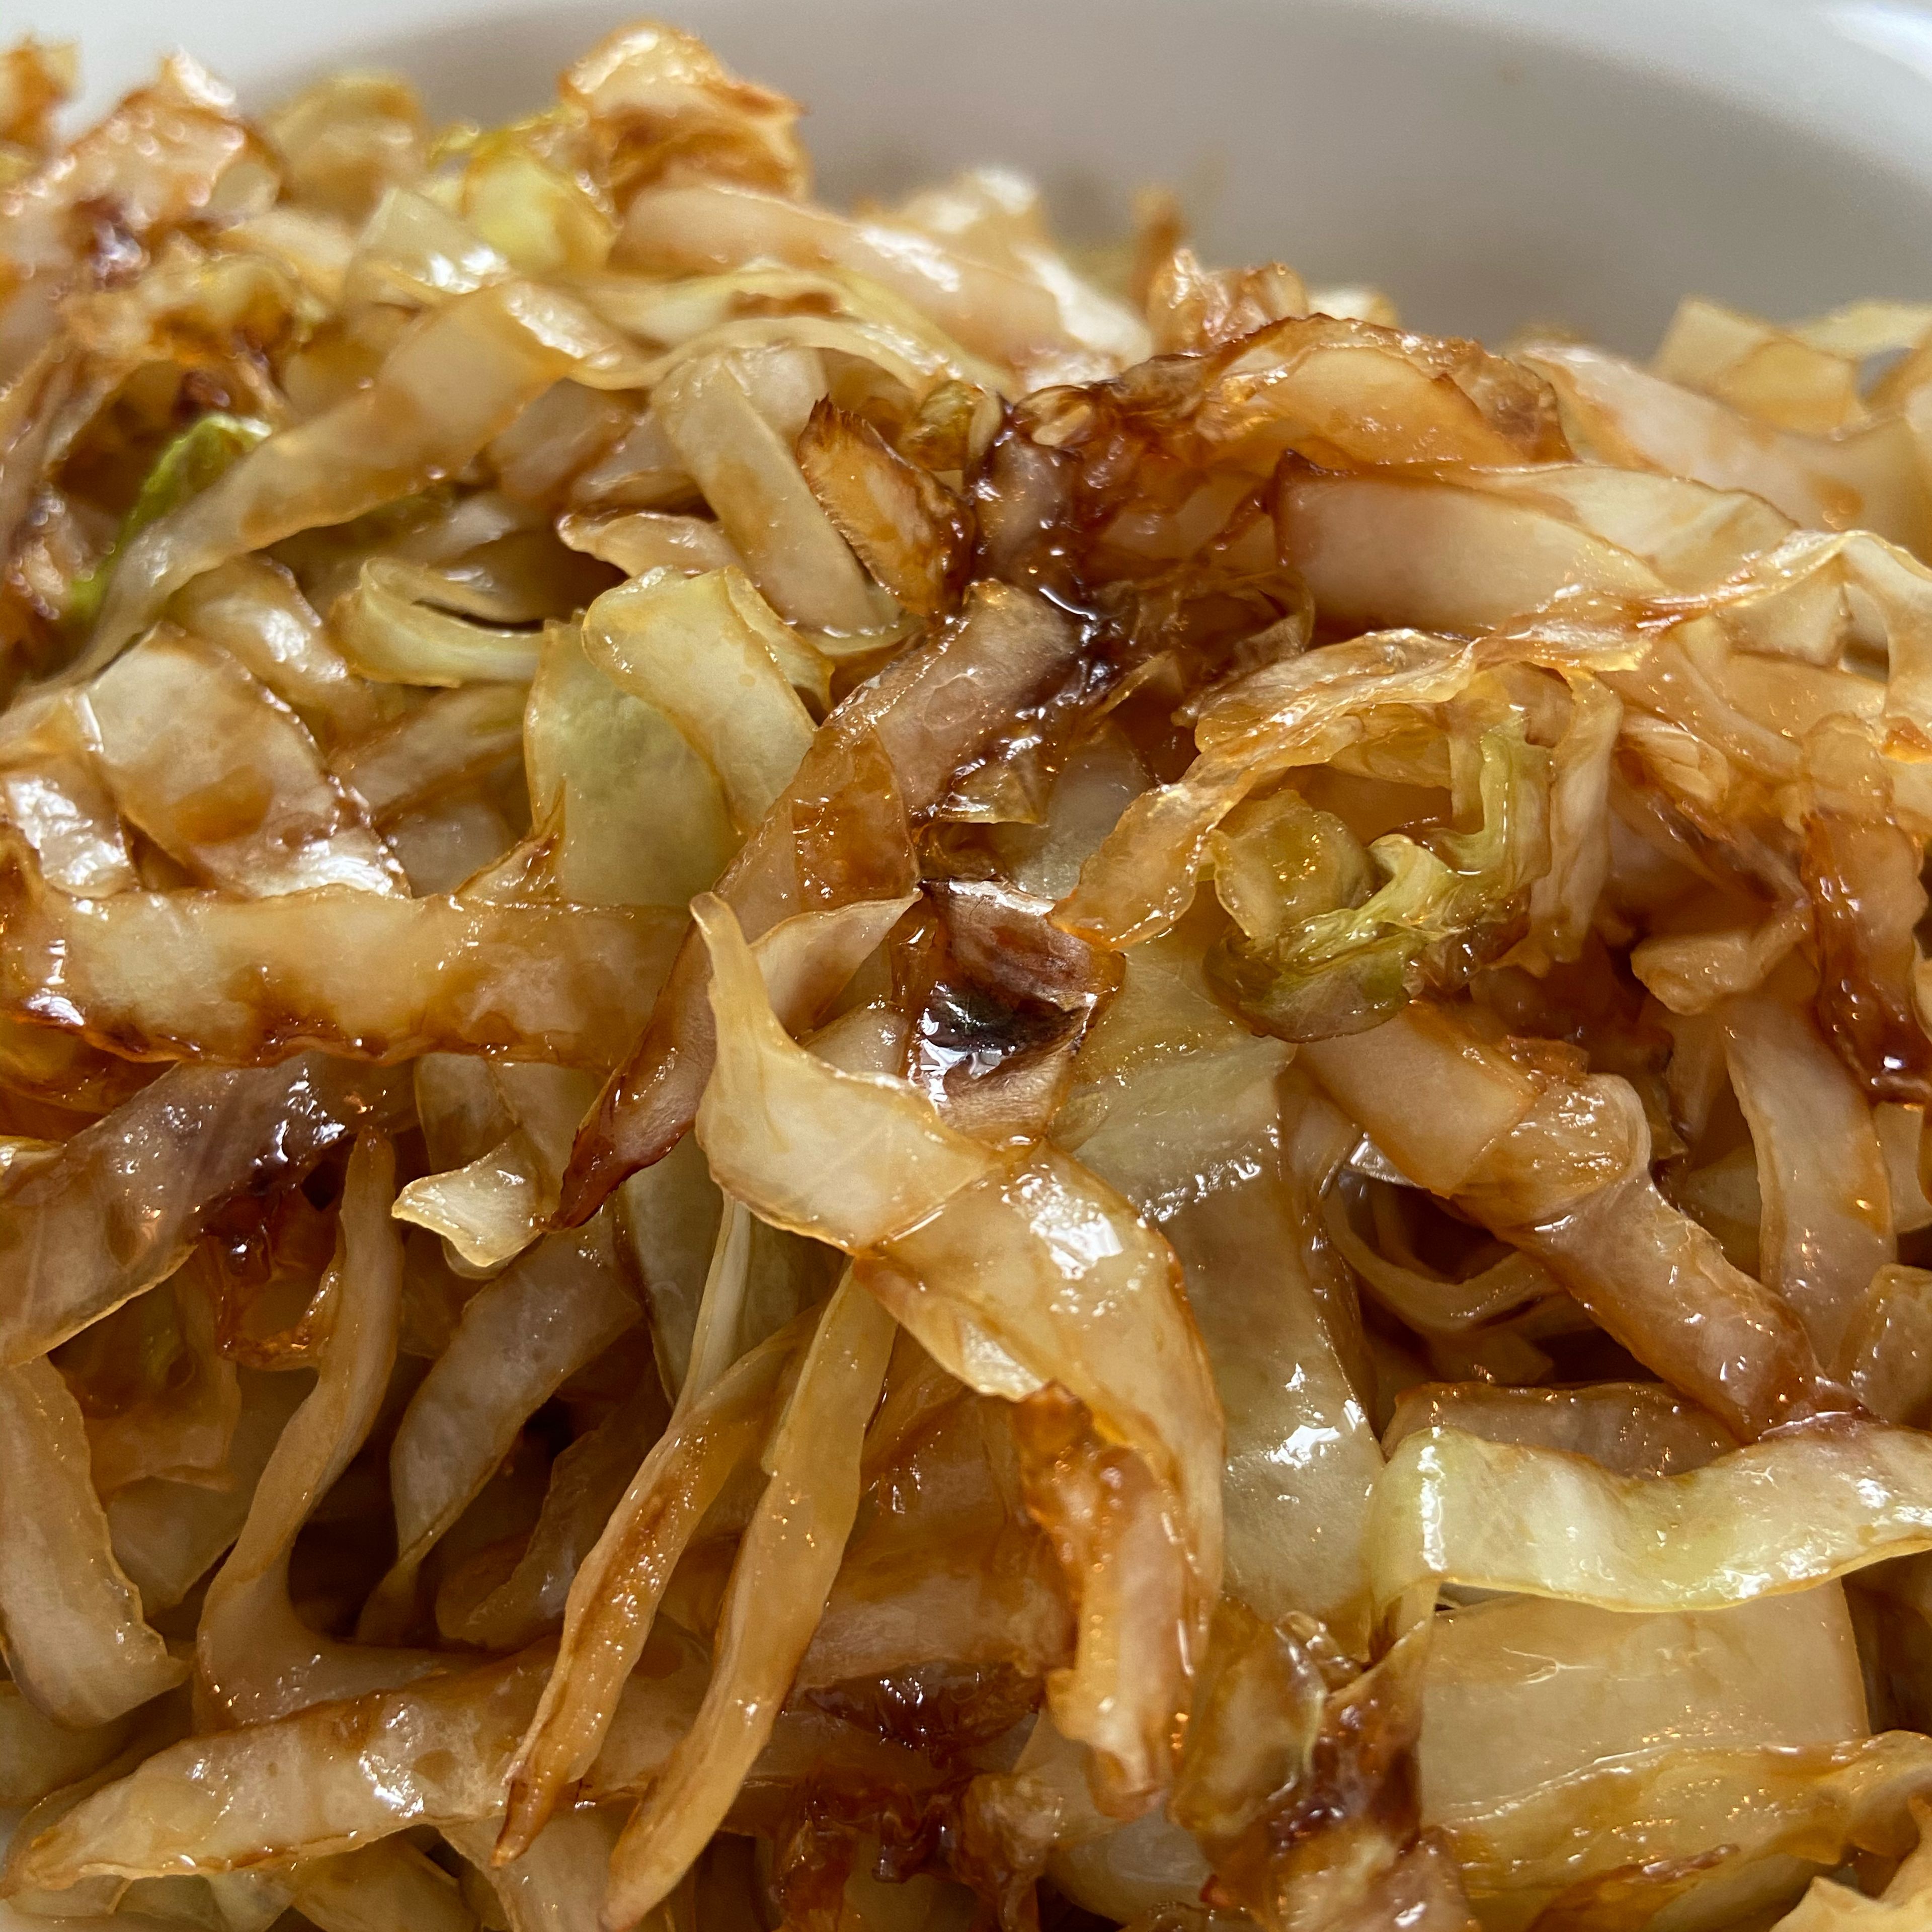 In portions caramelise 1 tbsp of lard with one-third of the chopped cabbage and one-third of the sliced onions until nice and dark.